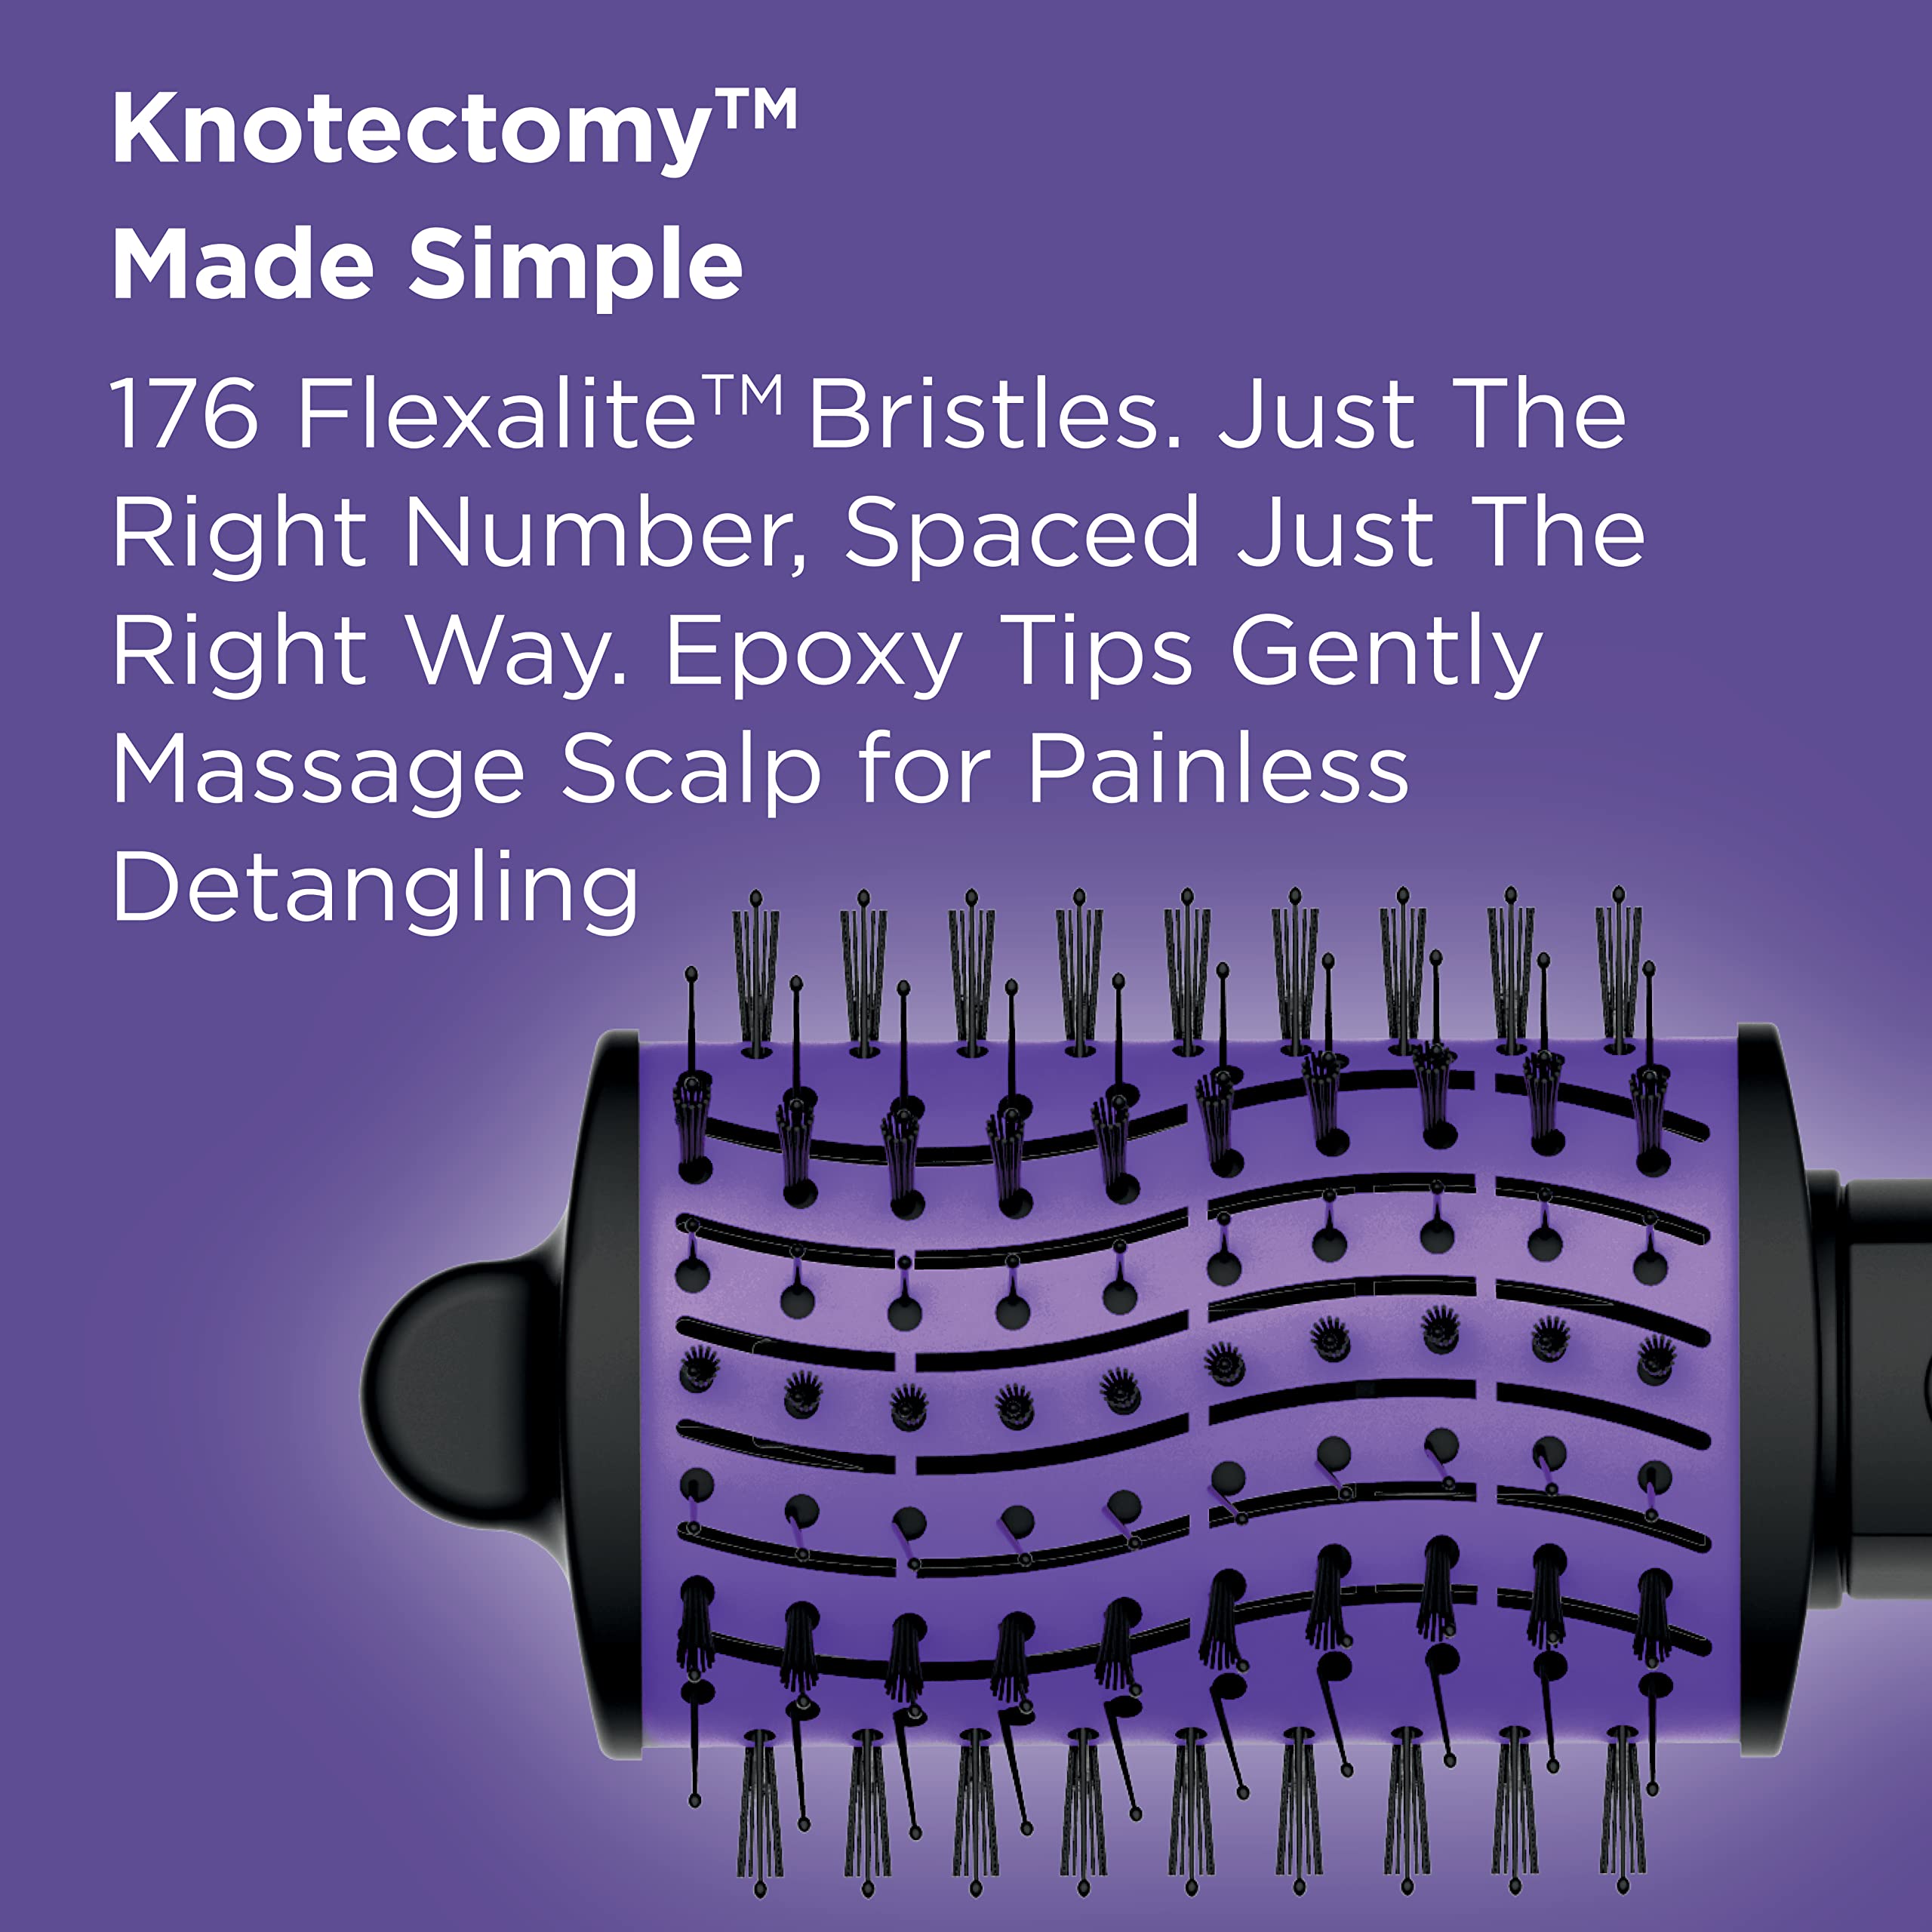 The Knot Dr Detangling Hot Air Brush by Conair